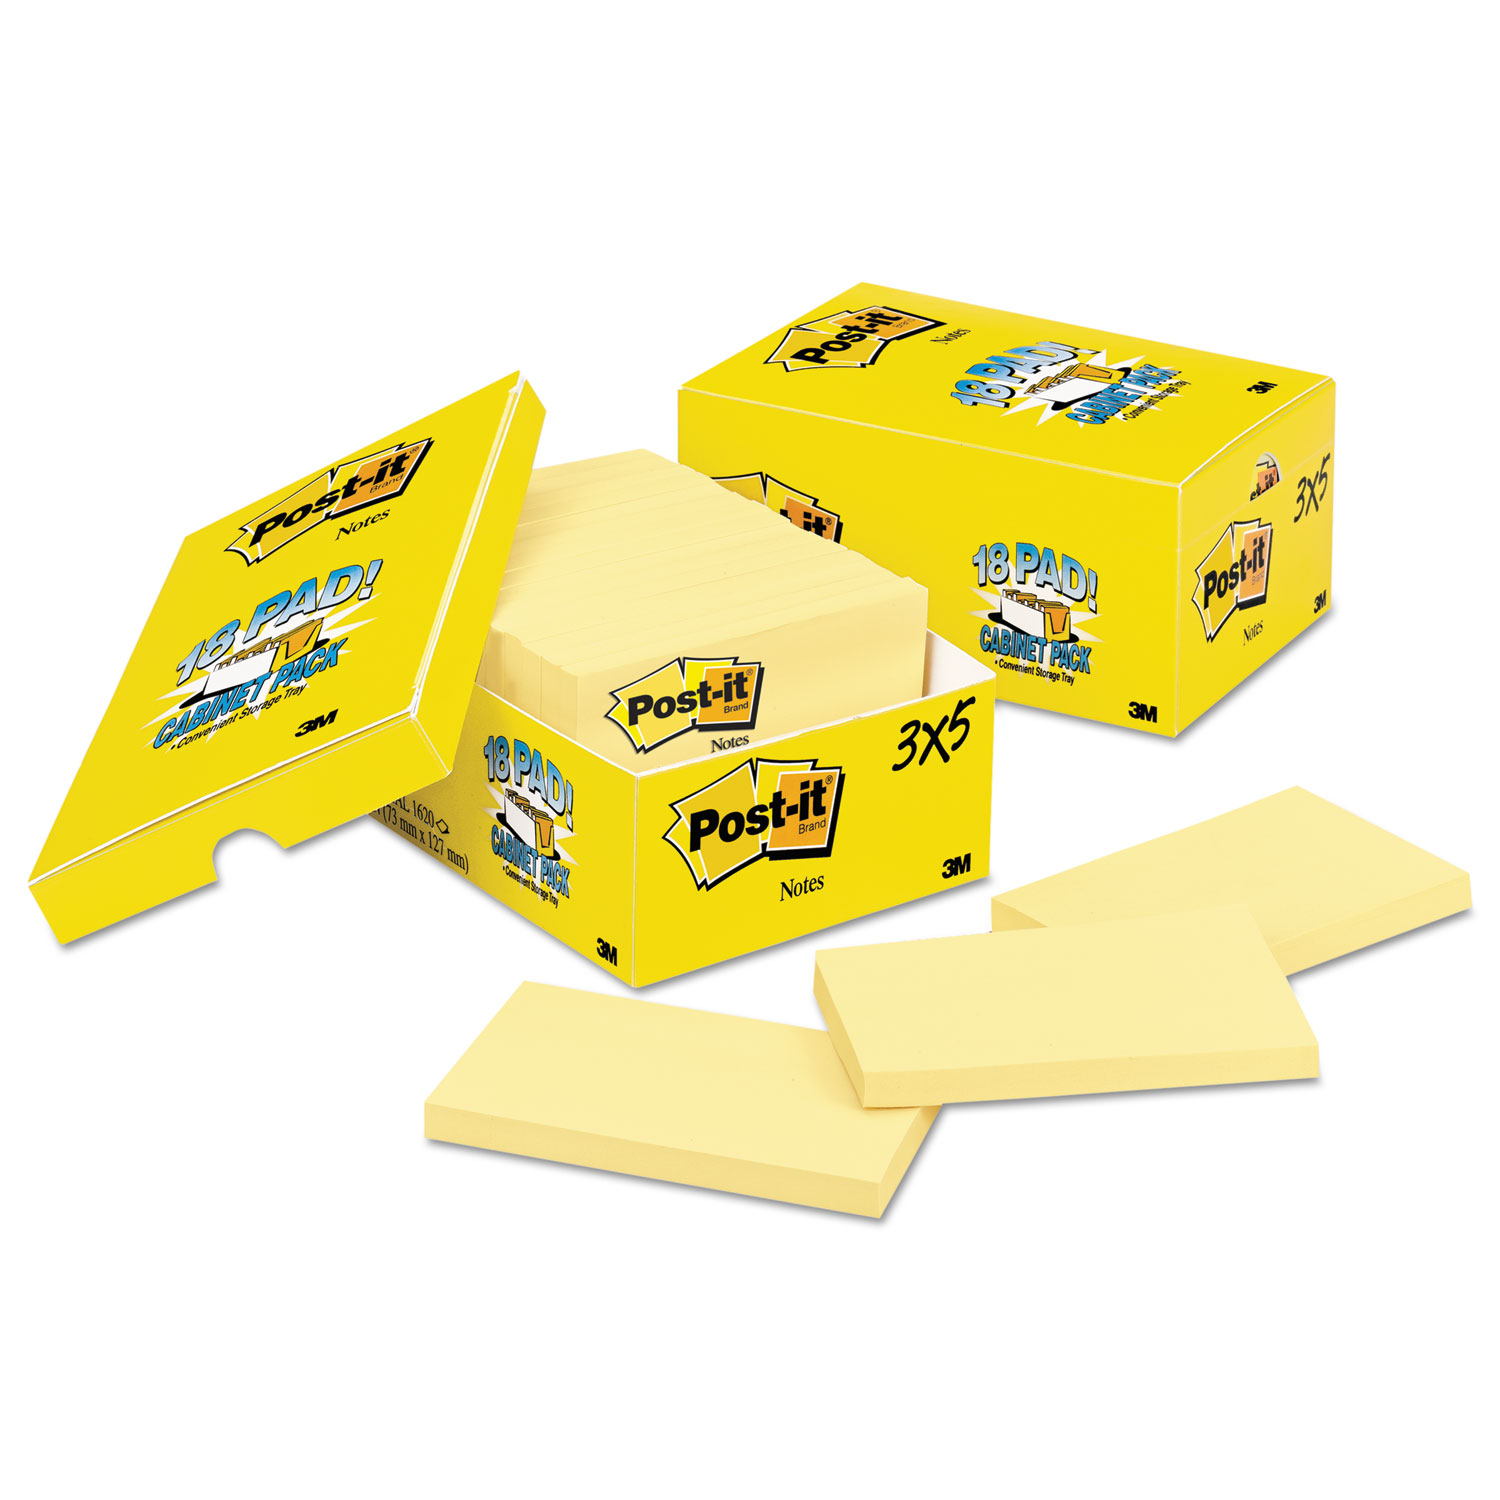 Post-it Notes MMM65518CP Original Pads in Canary Yellow, Cabinet Pack, 3 x 5, 90-Sheet, 18/Pack